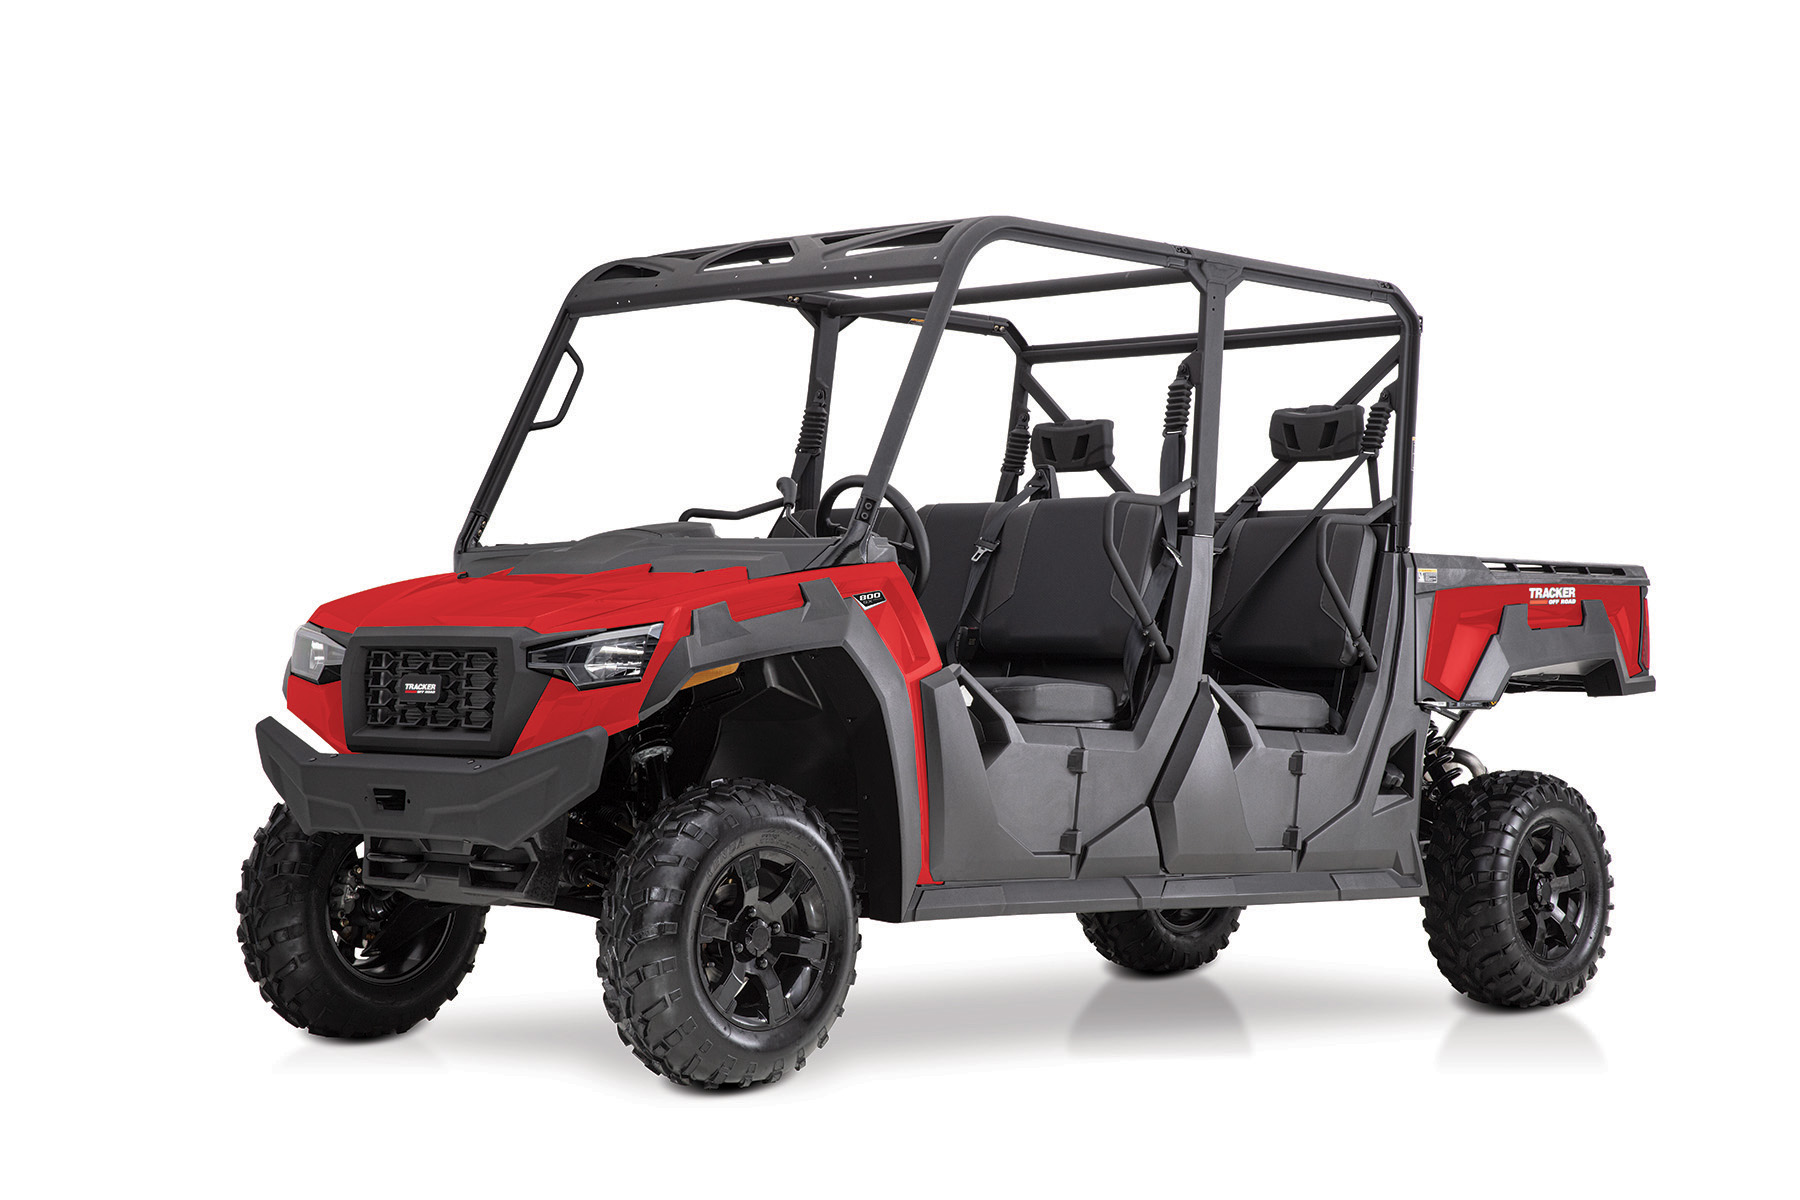 Magma Red Tracker 800SX LE Side by Side UTV